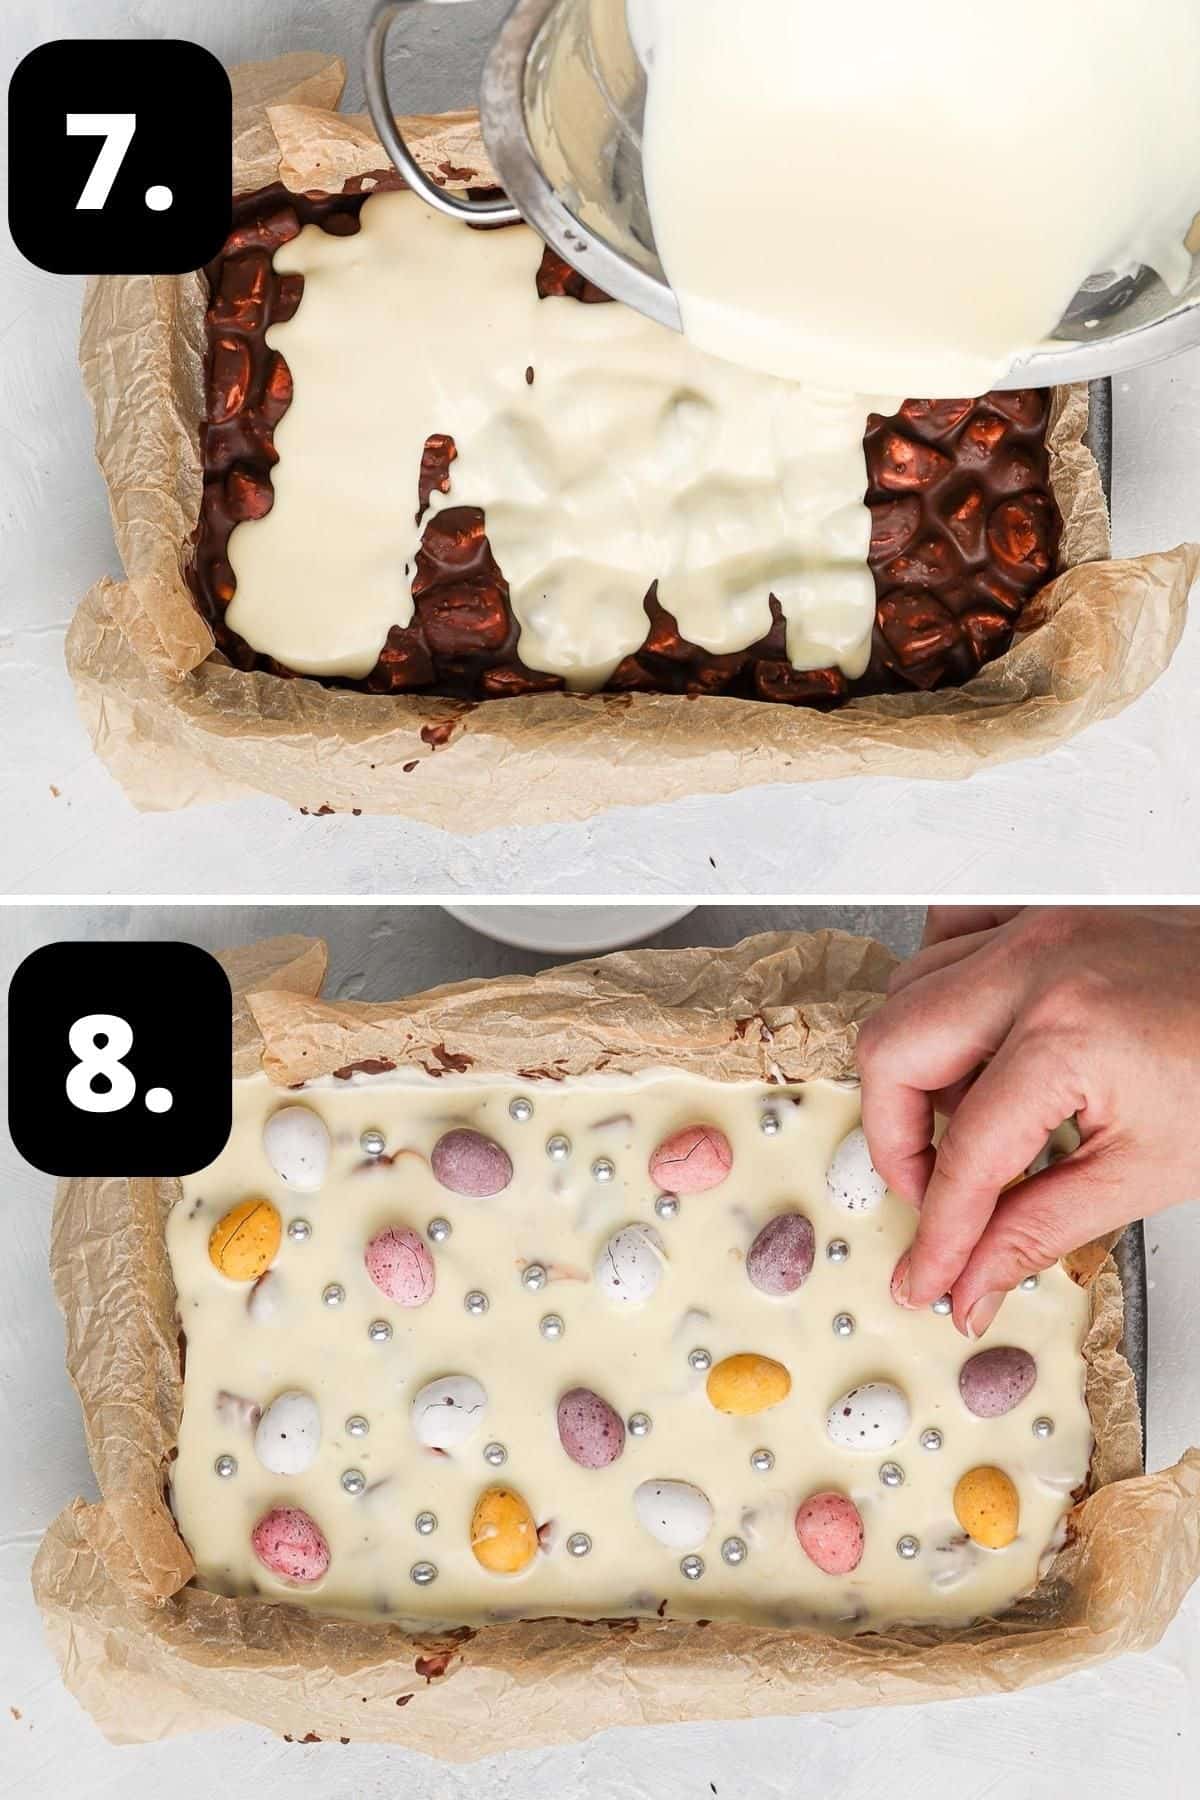 Steps 7-8 of preparing this recipe - pouring the white chocolate topping over the rocky road, and decorating with mini eggs and silver cachous.